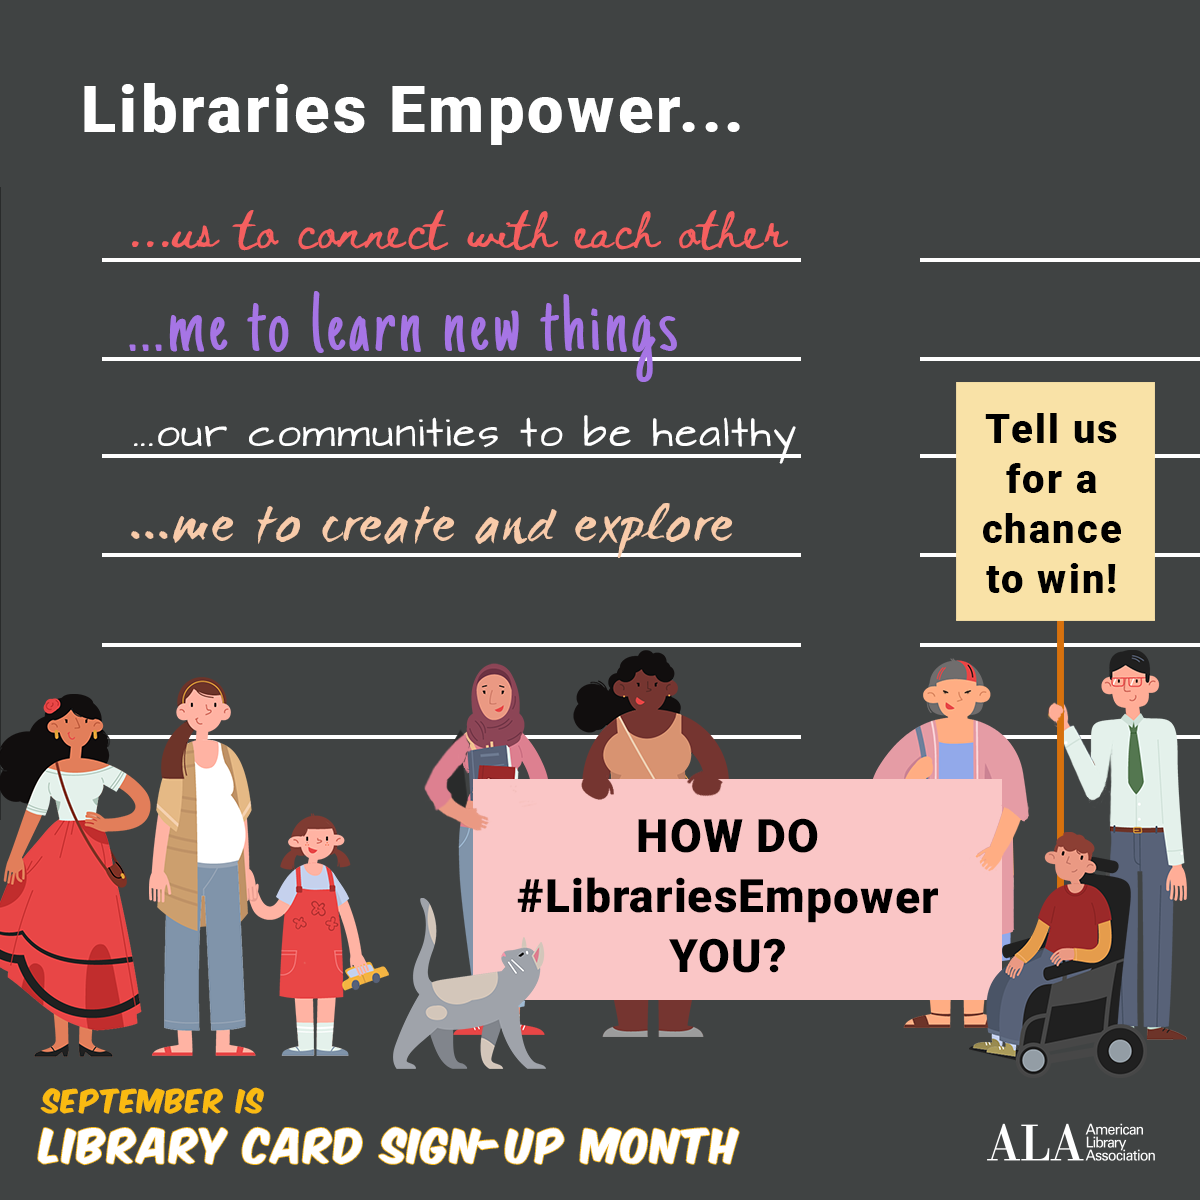 Quotes about how libraries empower